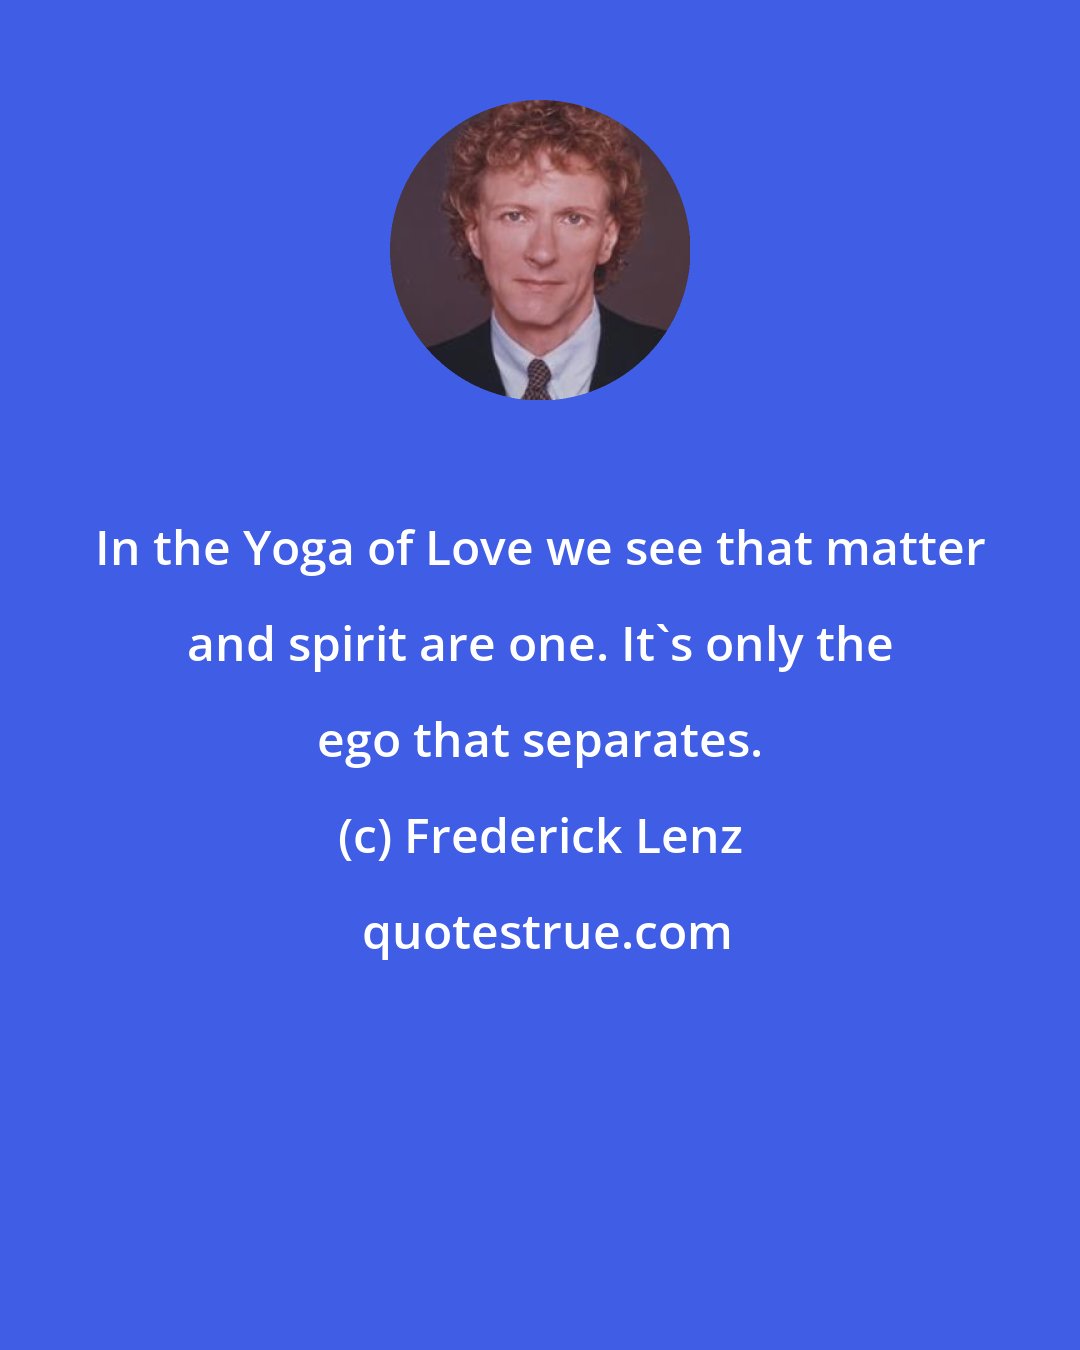 Frederick Lenz: In the Yoga of Love we see that matter and spirit are one. It's only the ego that separates.